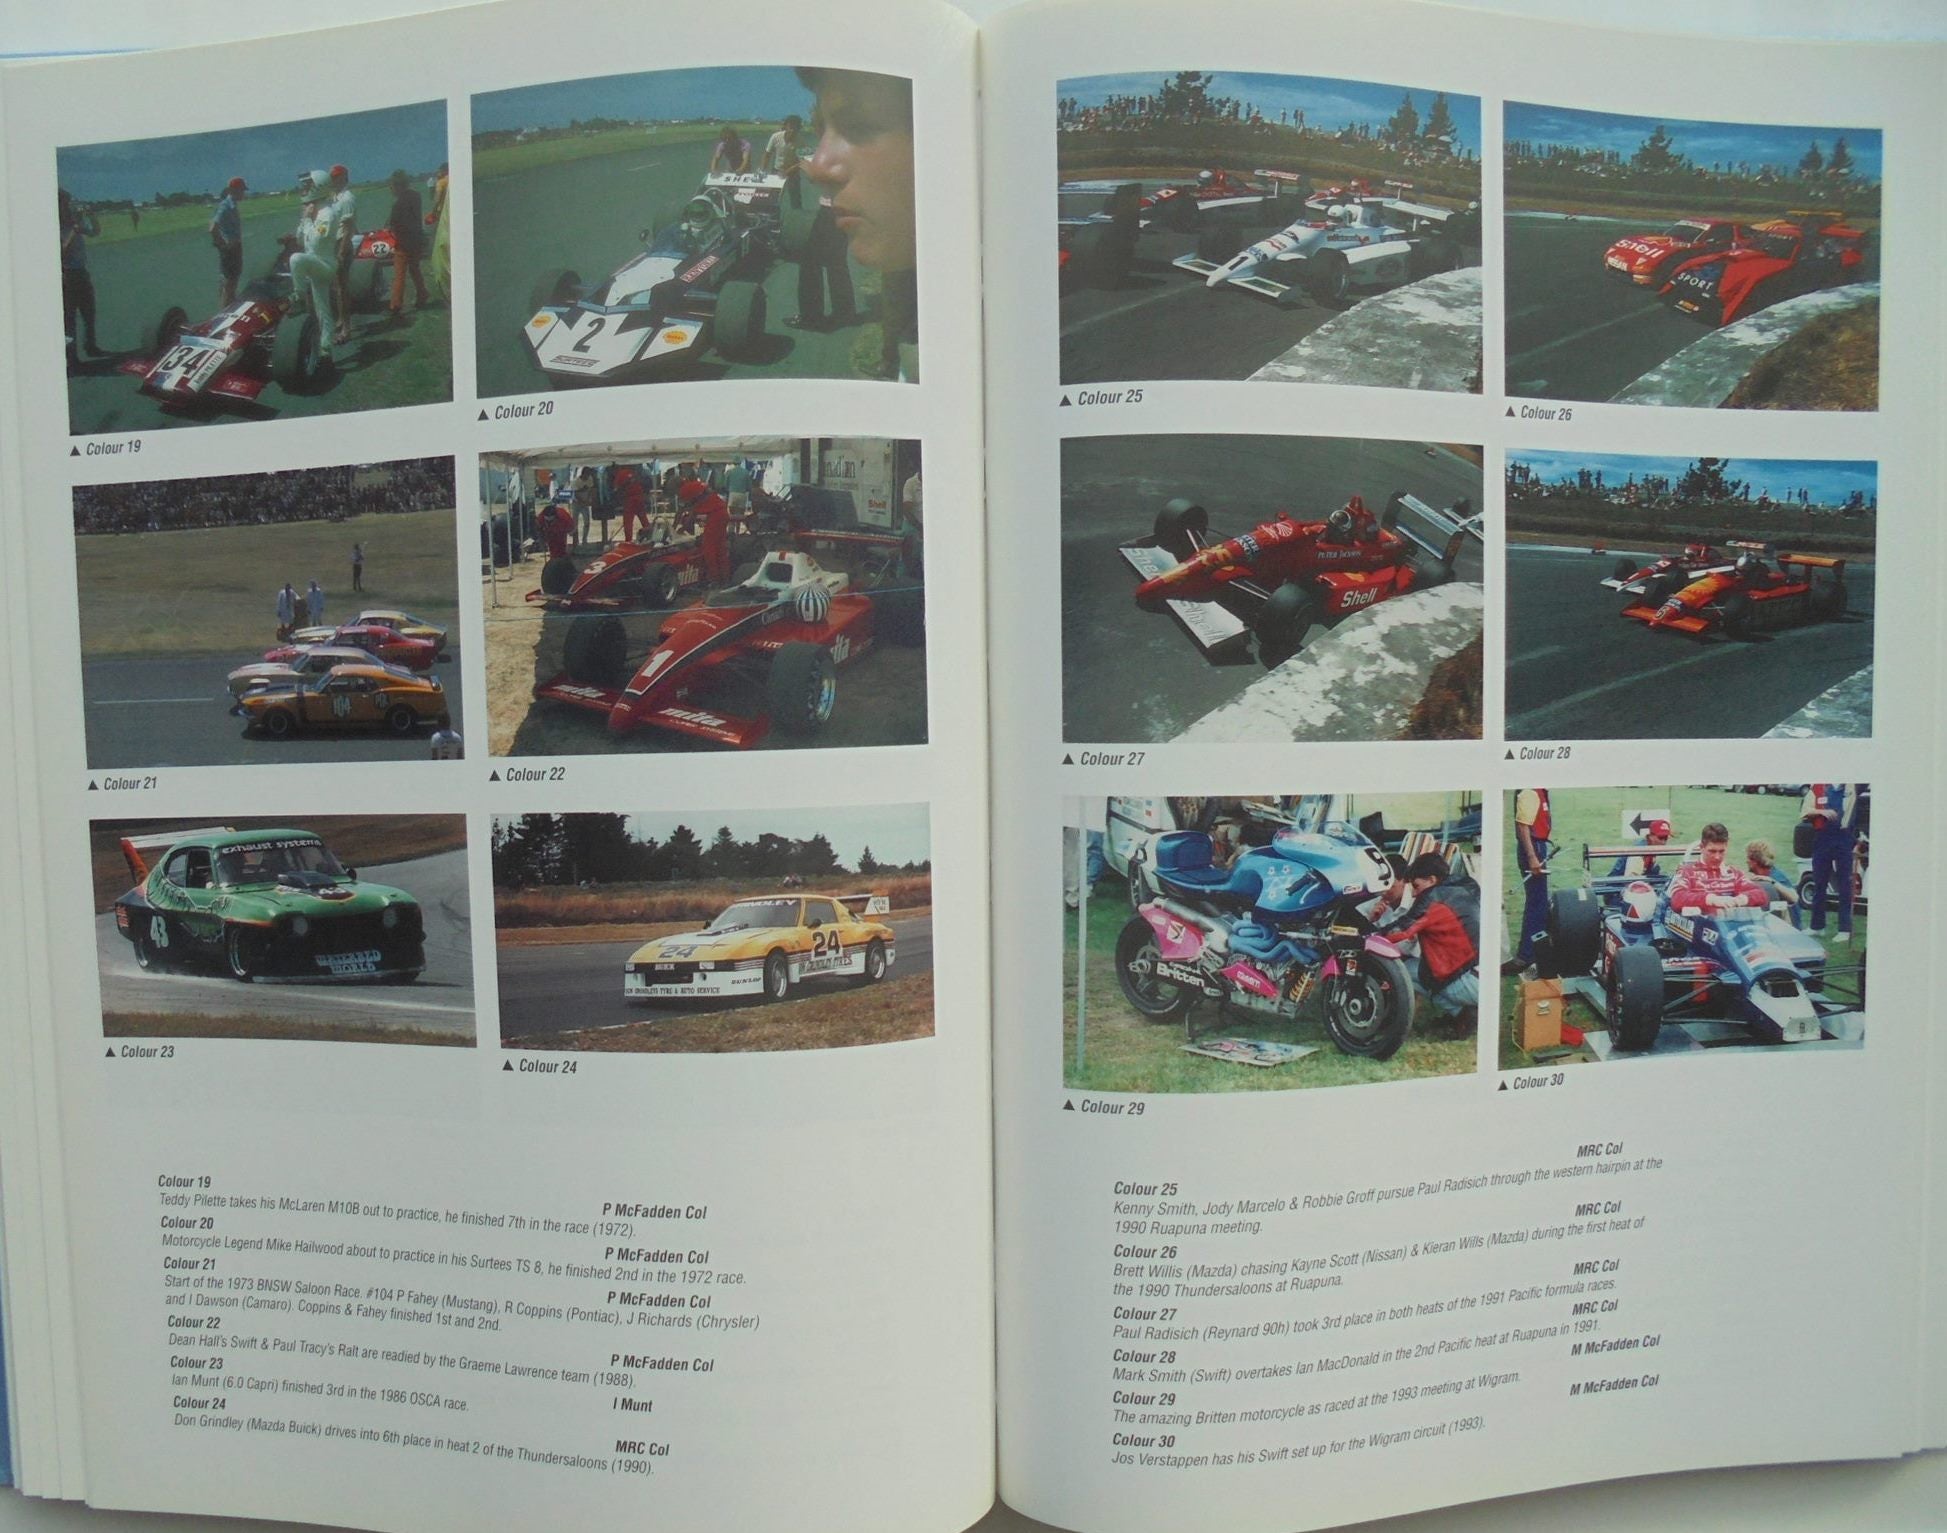 Wigram Motor Racing 1949-1994 The history of the Wigram Motor Racing Club By Murray McFadden. Publisher: The Motor Racing Club, 1996, FIRST EDITION. SCARCE.